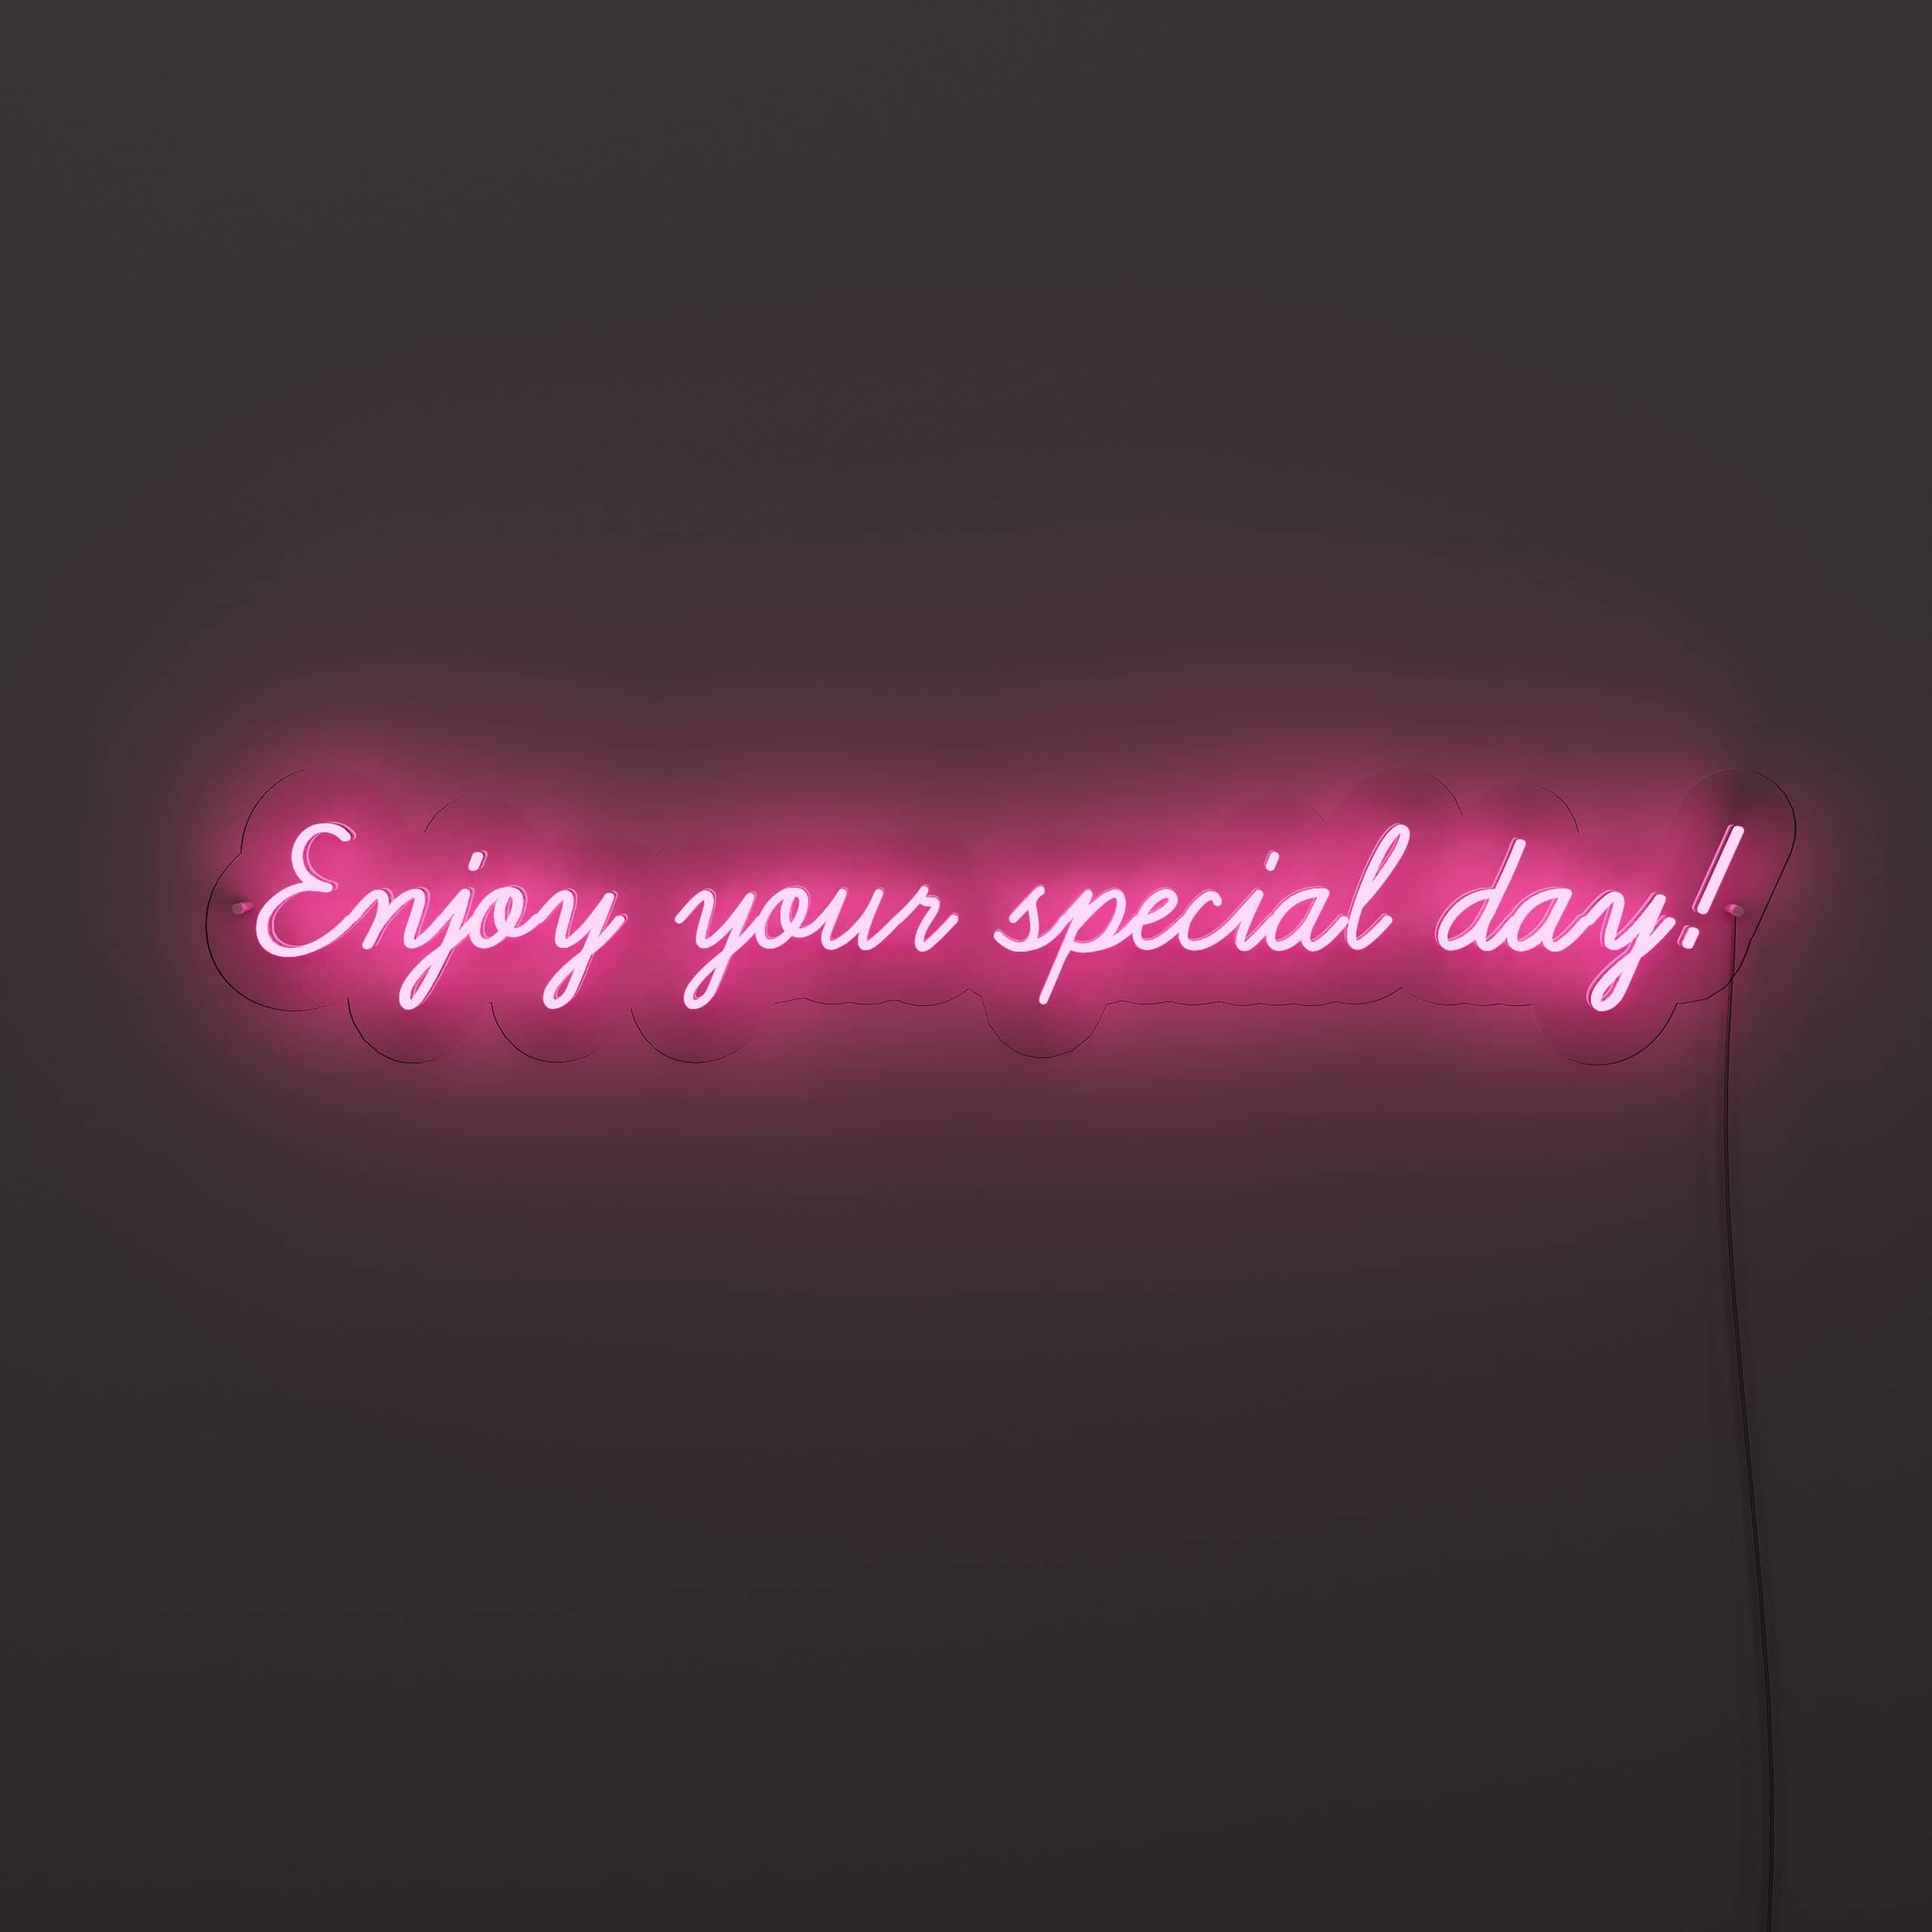 sending-you-wishes-for-a-remarkable-day!-neon-sign-lite